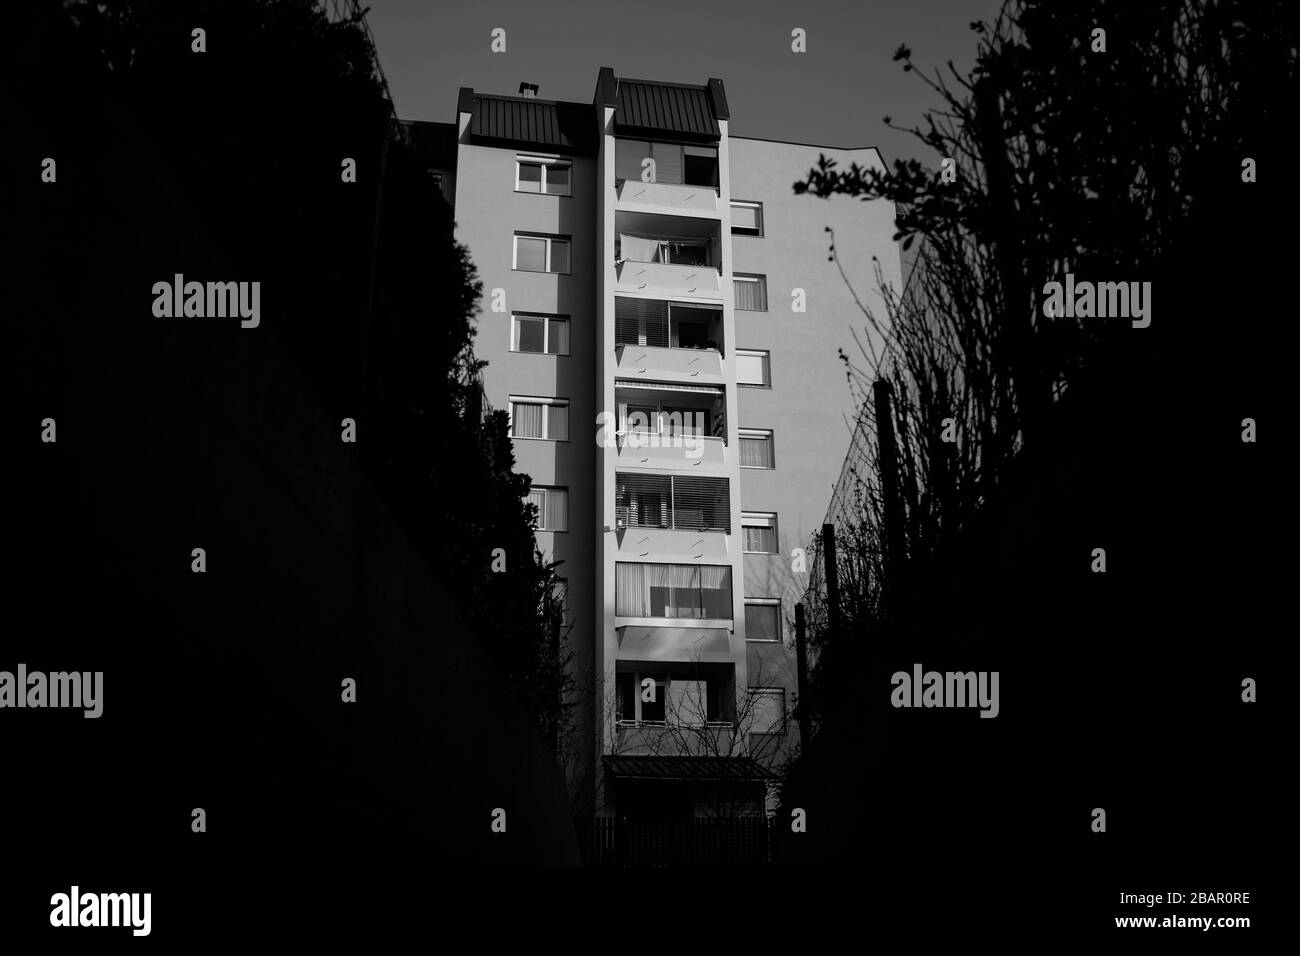 Kranj, Slovenia, March 20, 2020: A view of an apartment building during the coronavirus outbreak nationwide lockdown when people are asked to stay at home. Stock Photo